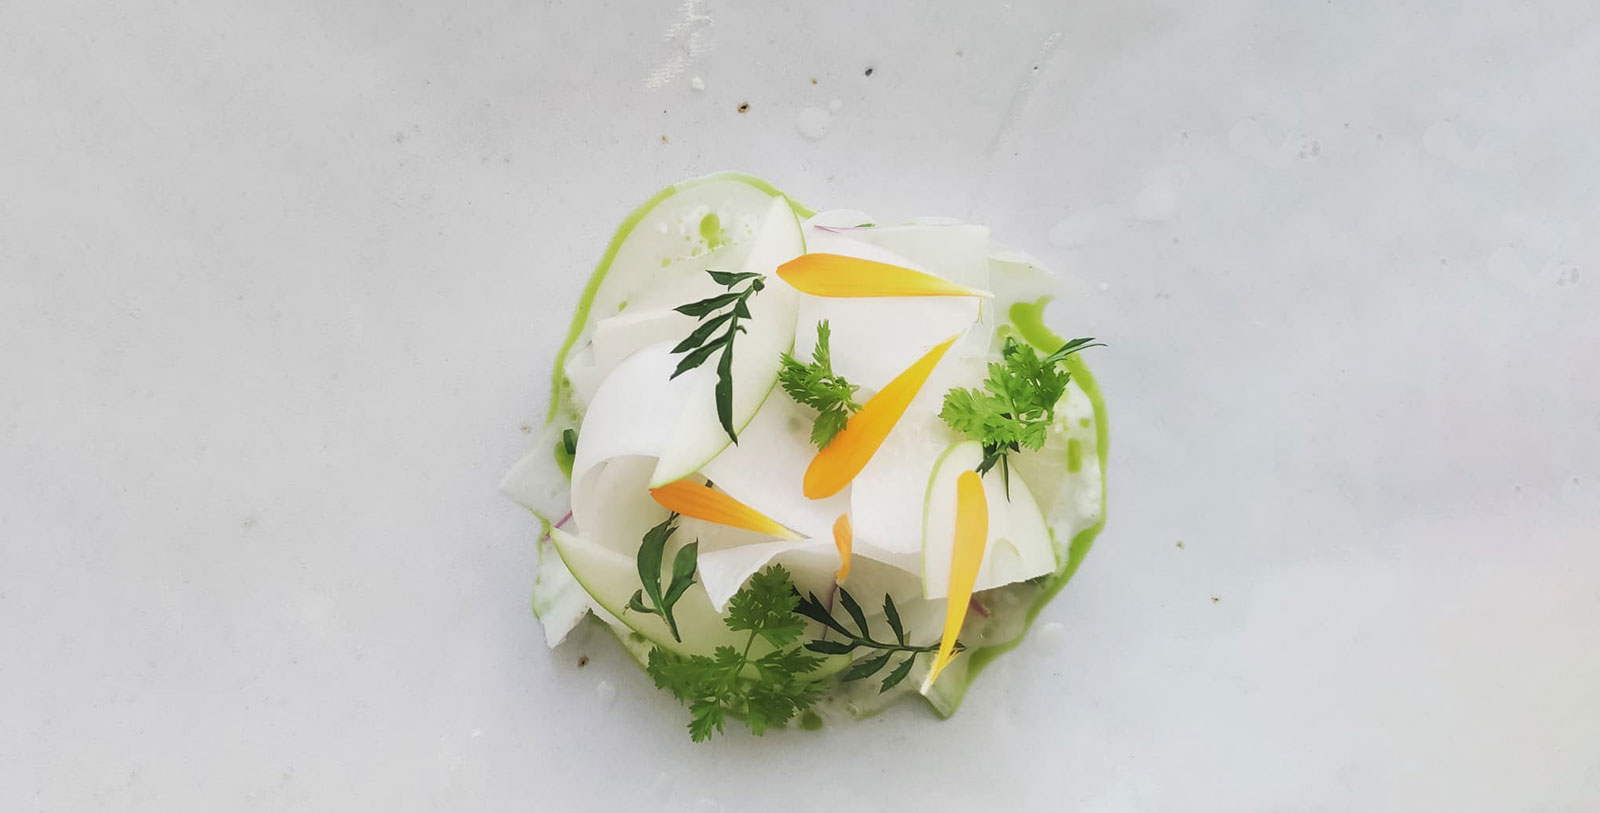 Image of Doonbeg crab, turnip, apple and marigold served at the Dining Room, Gregans Castle Hotel, Ballyvaughan, Ireland, 1800s , Member of Historic Hotels Worldwide, Taste